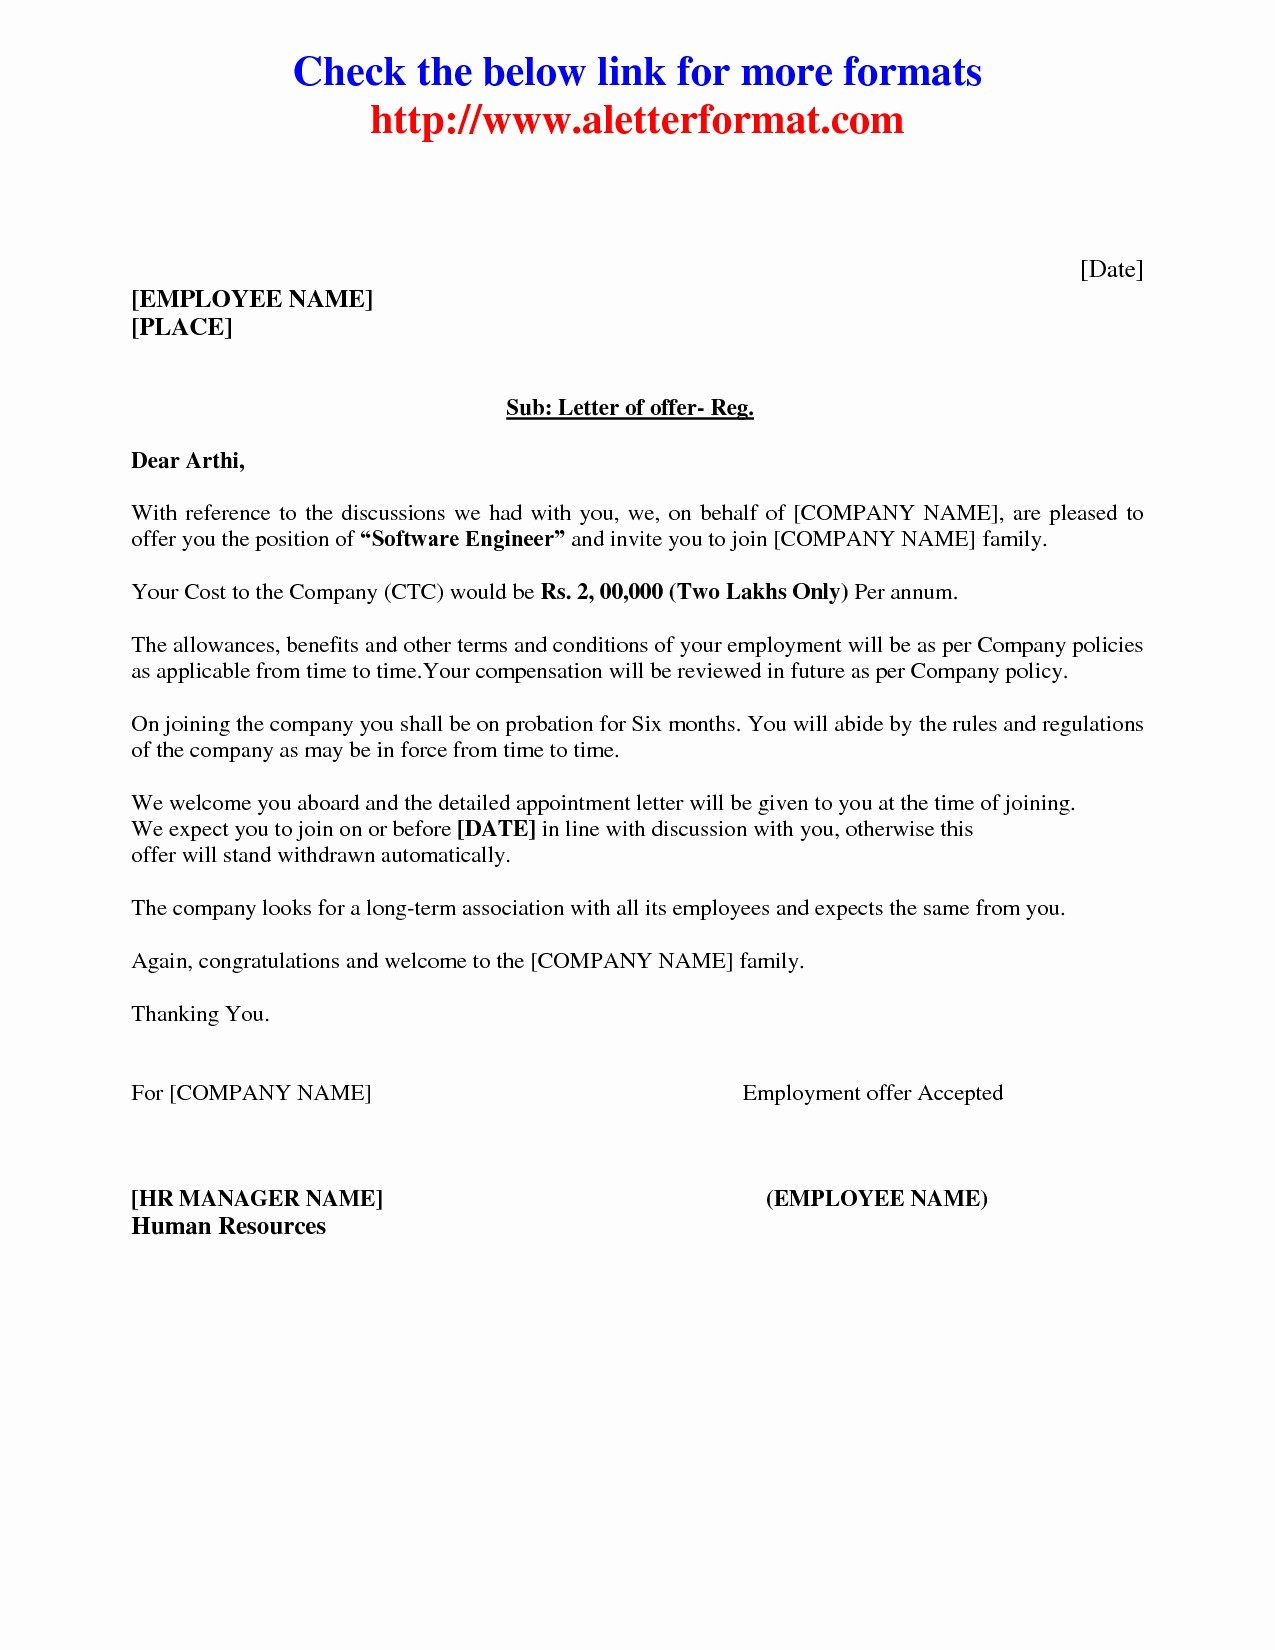 Job Offer Letter Template Pdf - Appointment Letter Sample In Word format India Copy Appointment